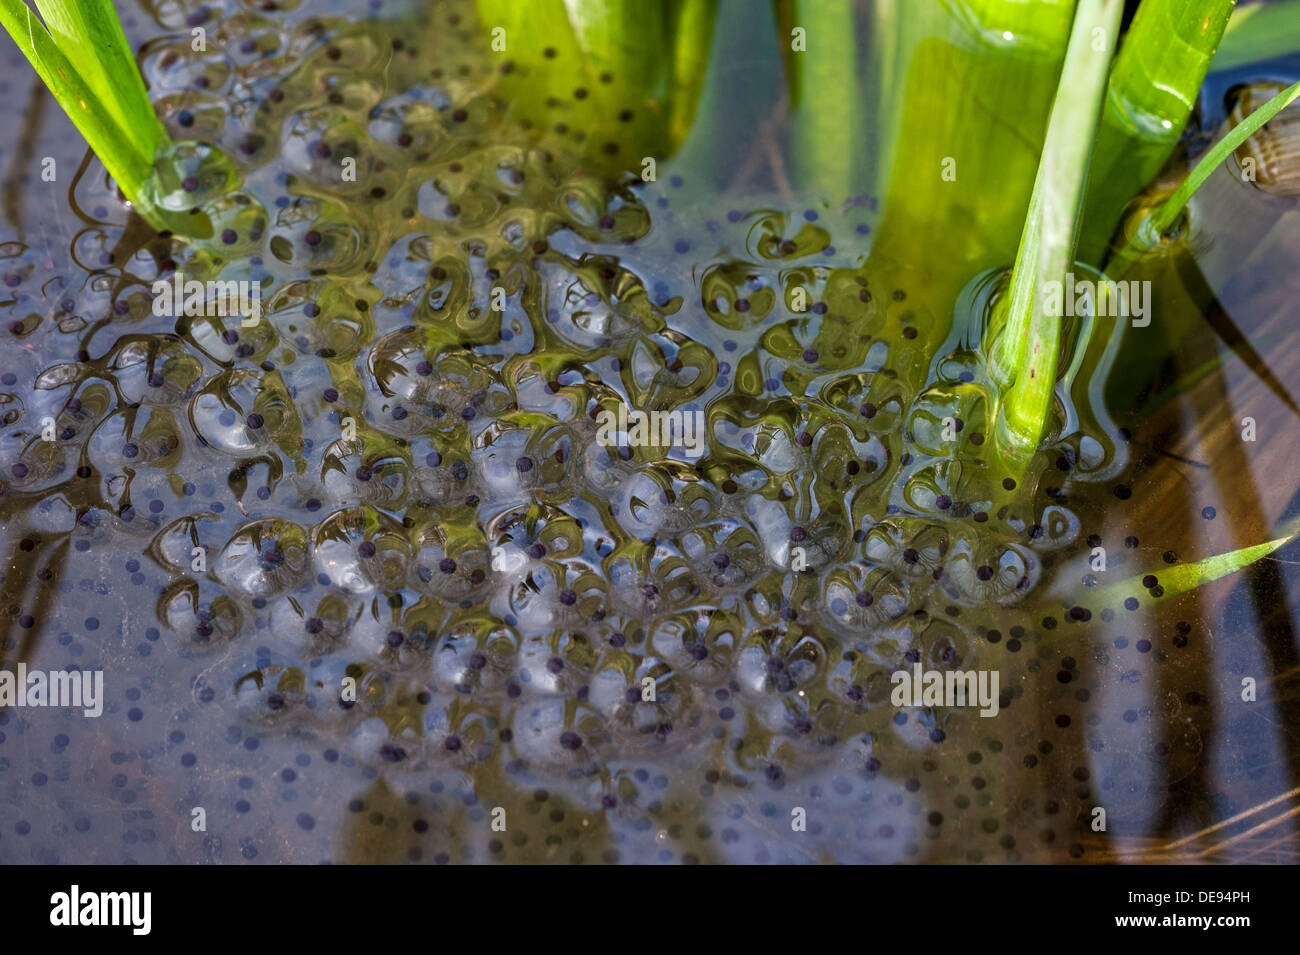 European common brown frog (Rana temporaria) frogspawn among water plants in pond in spring Stock Photo